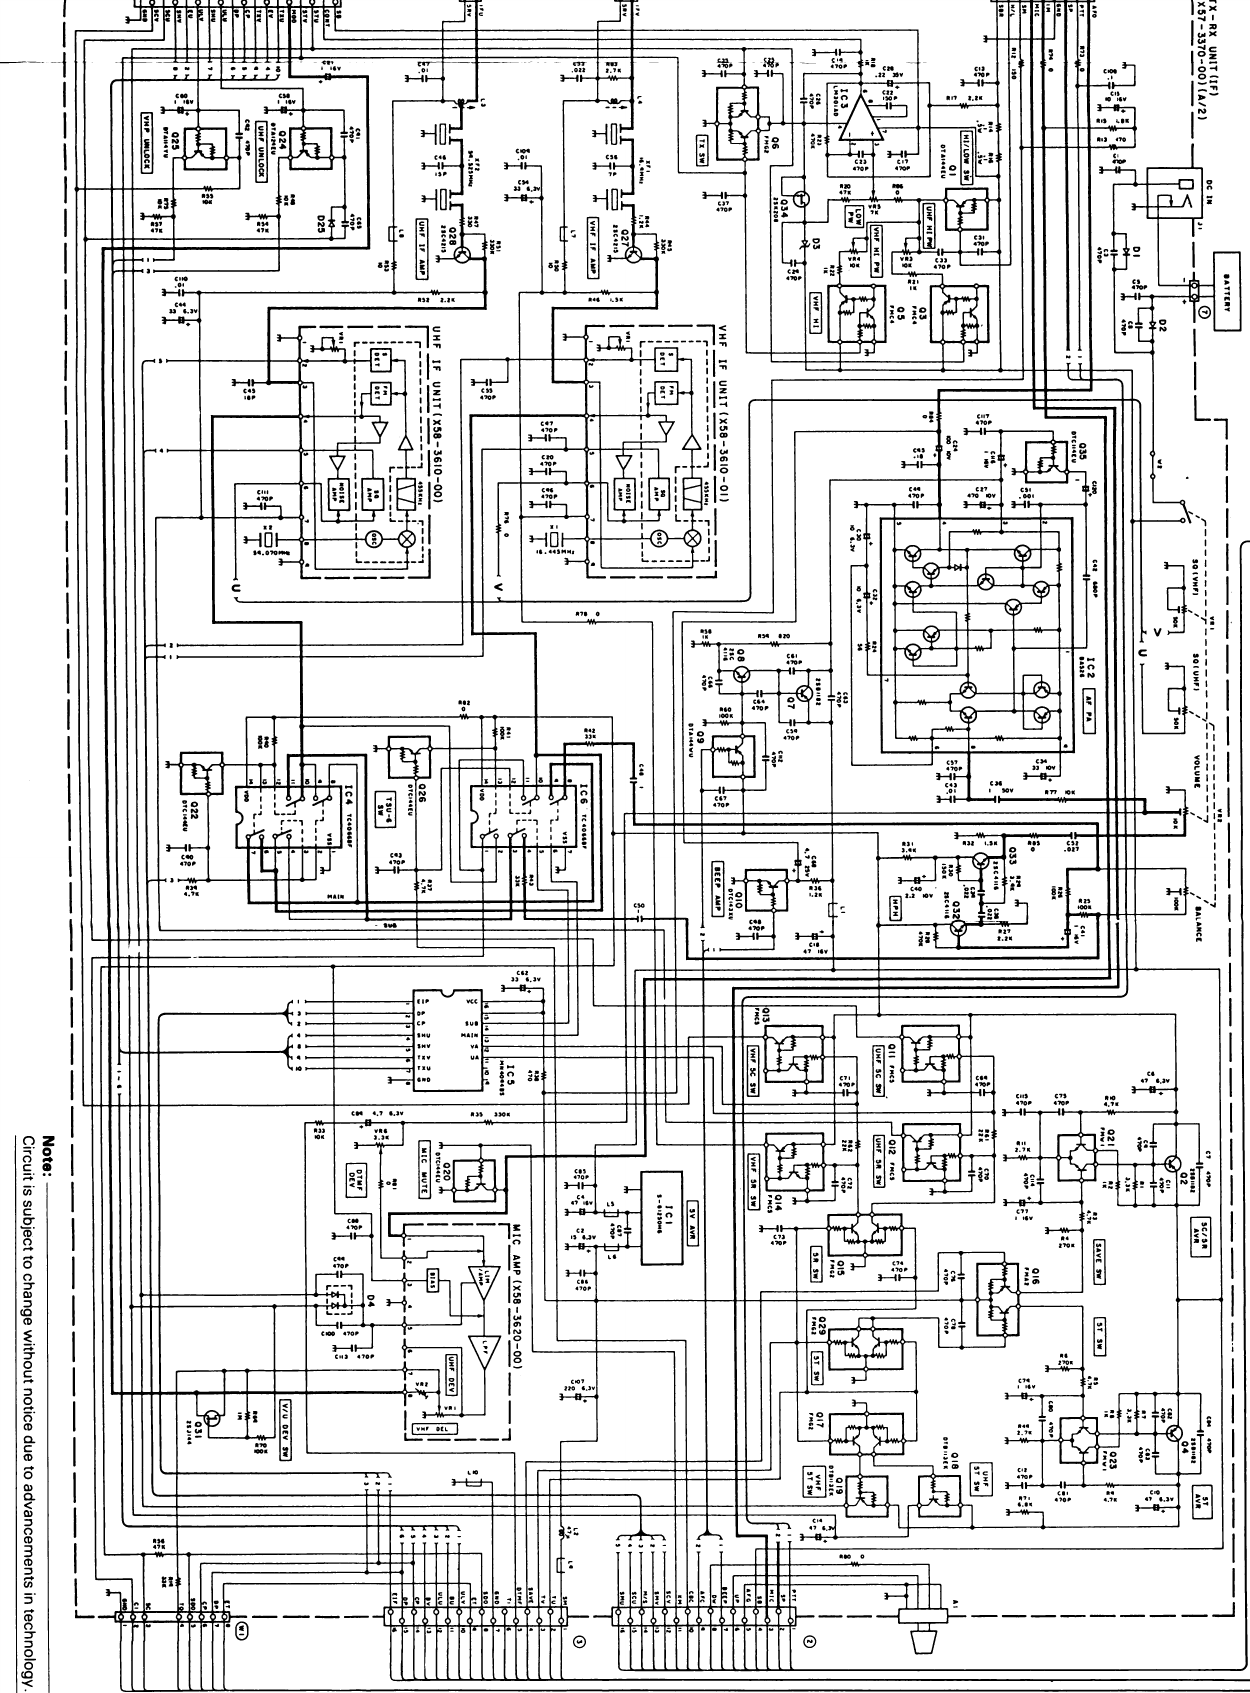 Page 3 of 4 - KENWOOD--TH-75-Schematic